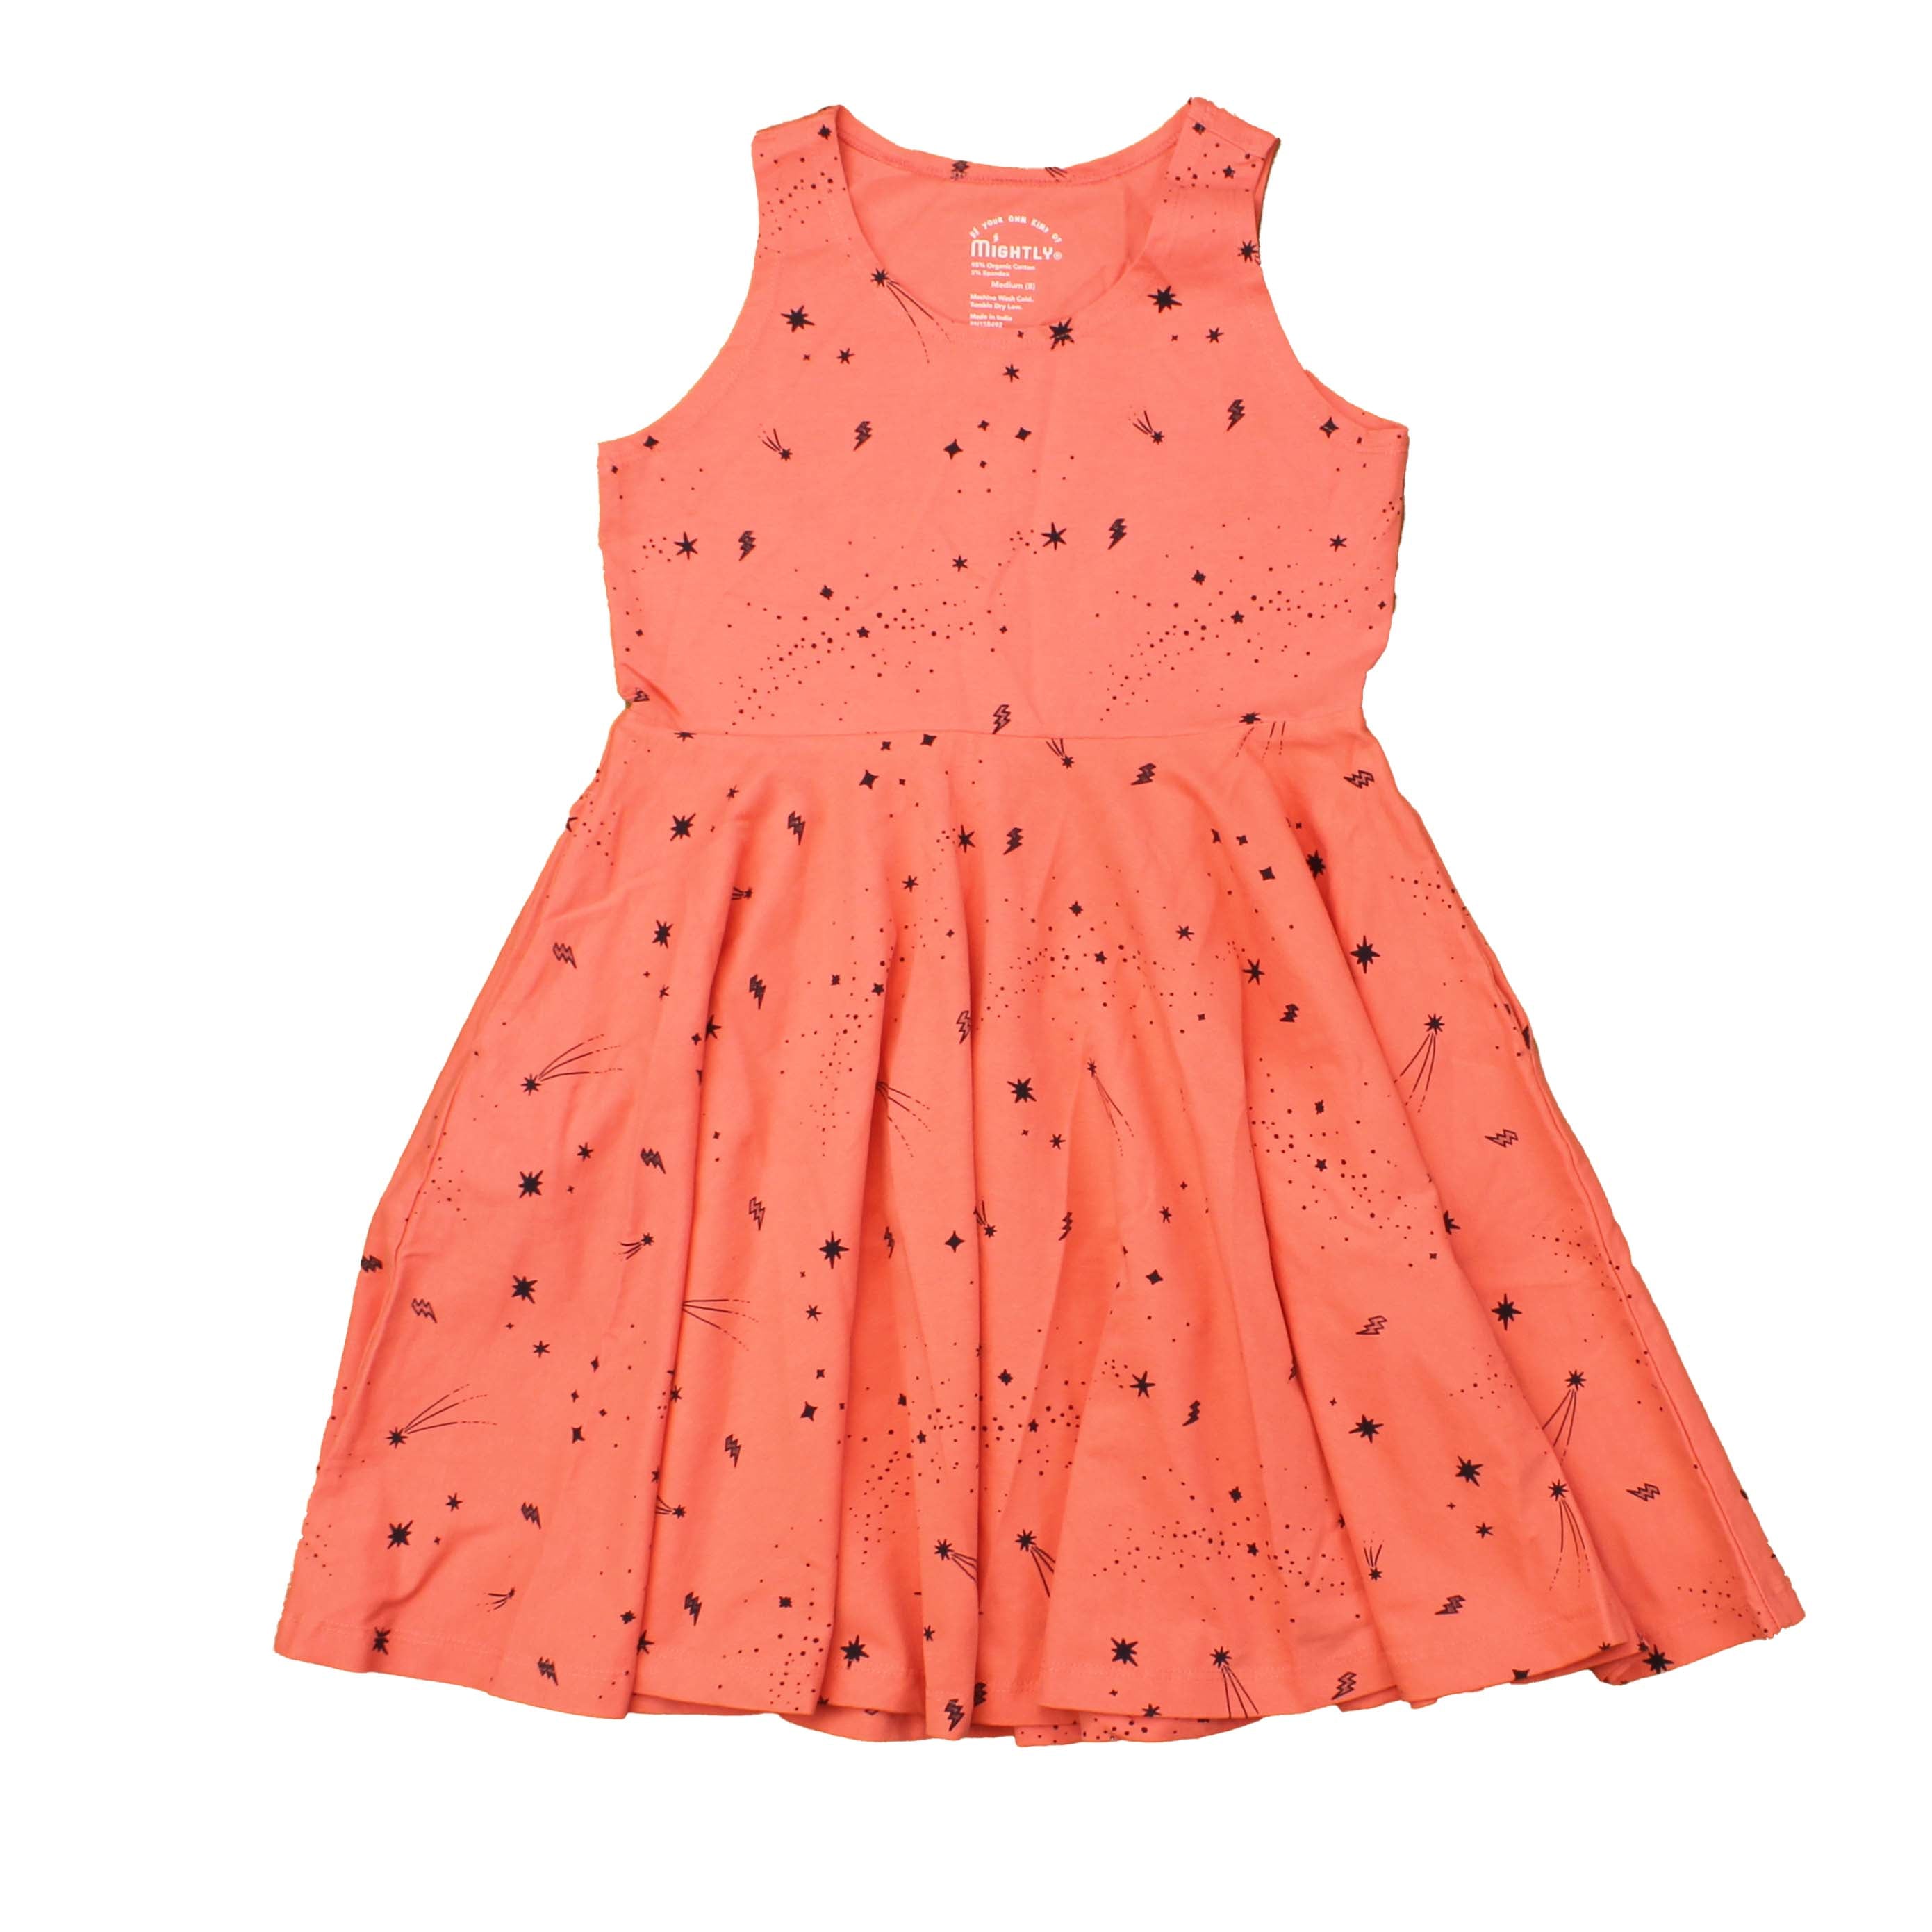 Pre-owned Coral | Black | Stars Dress size: Big Girl